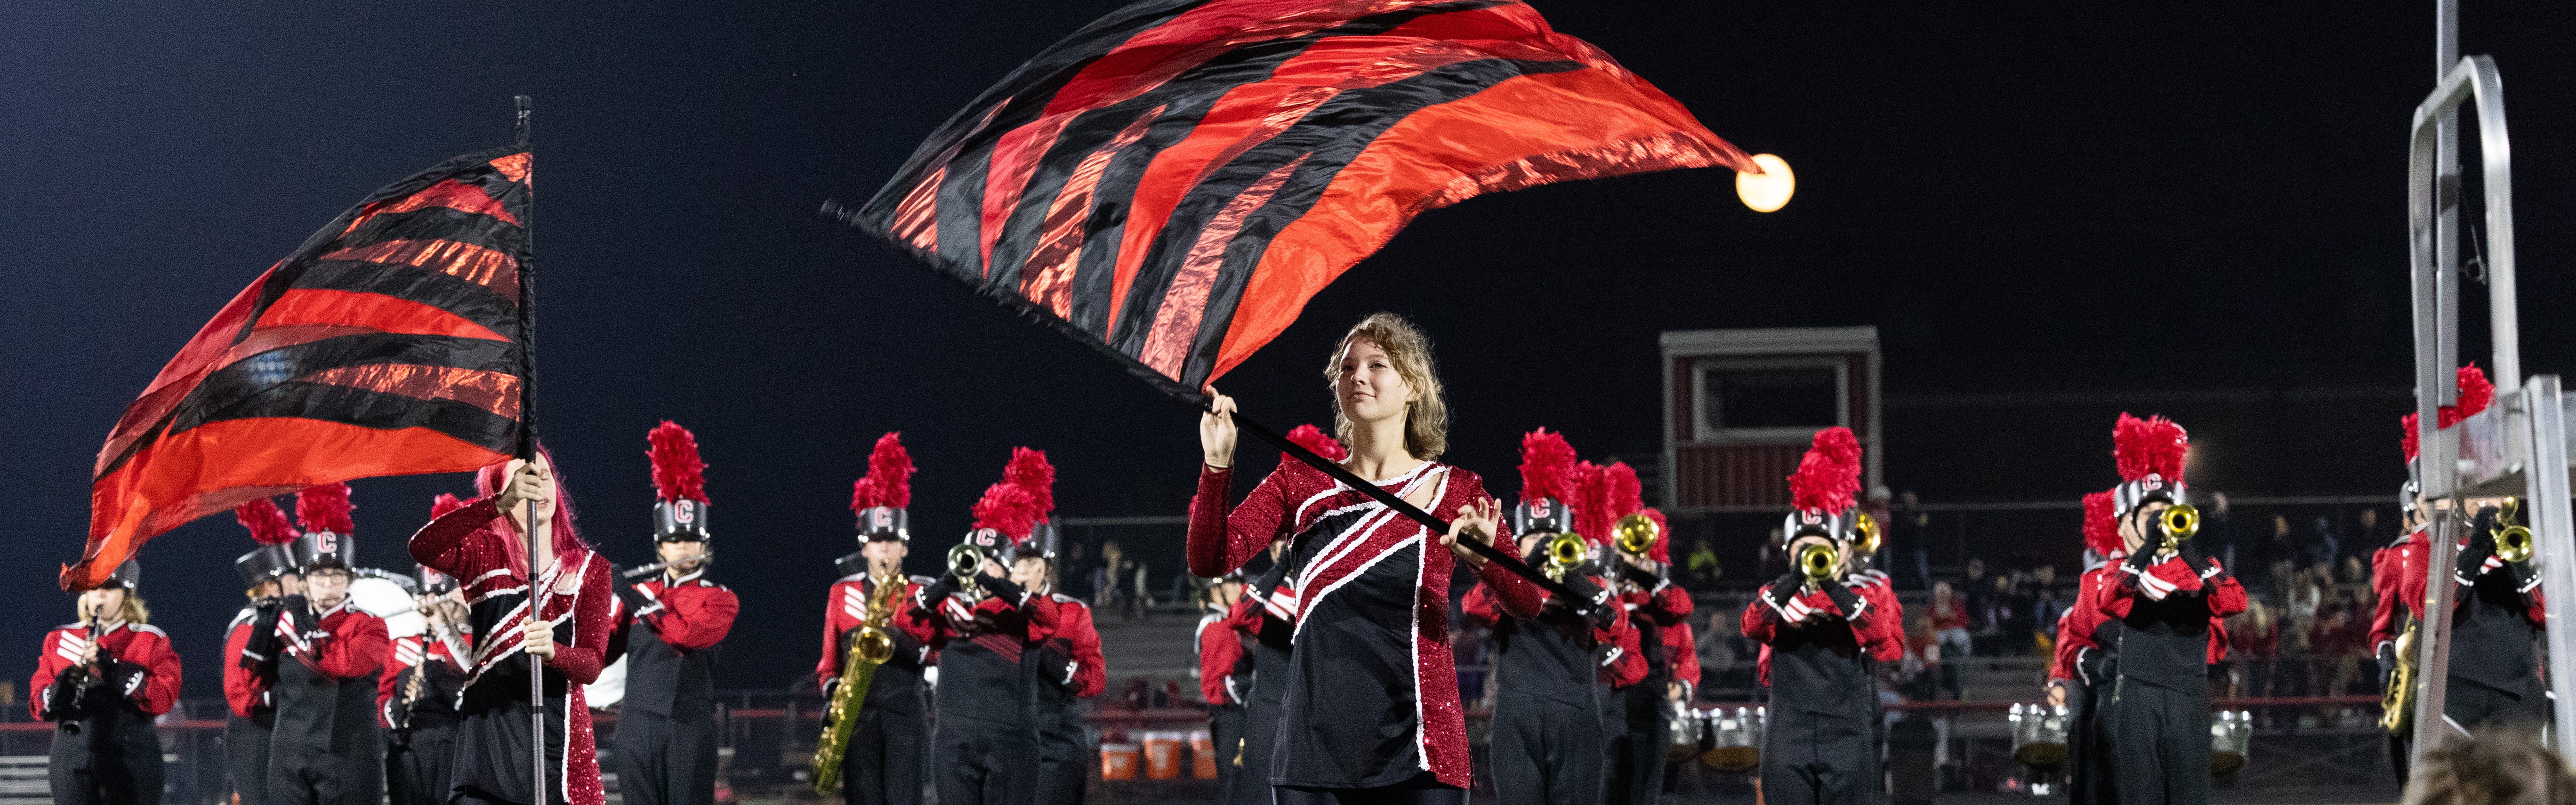 marching band flag feature